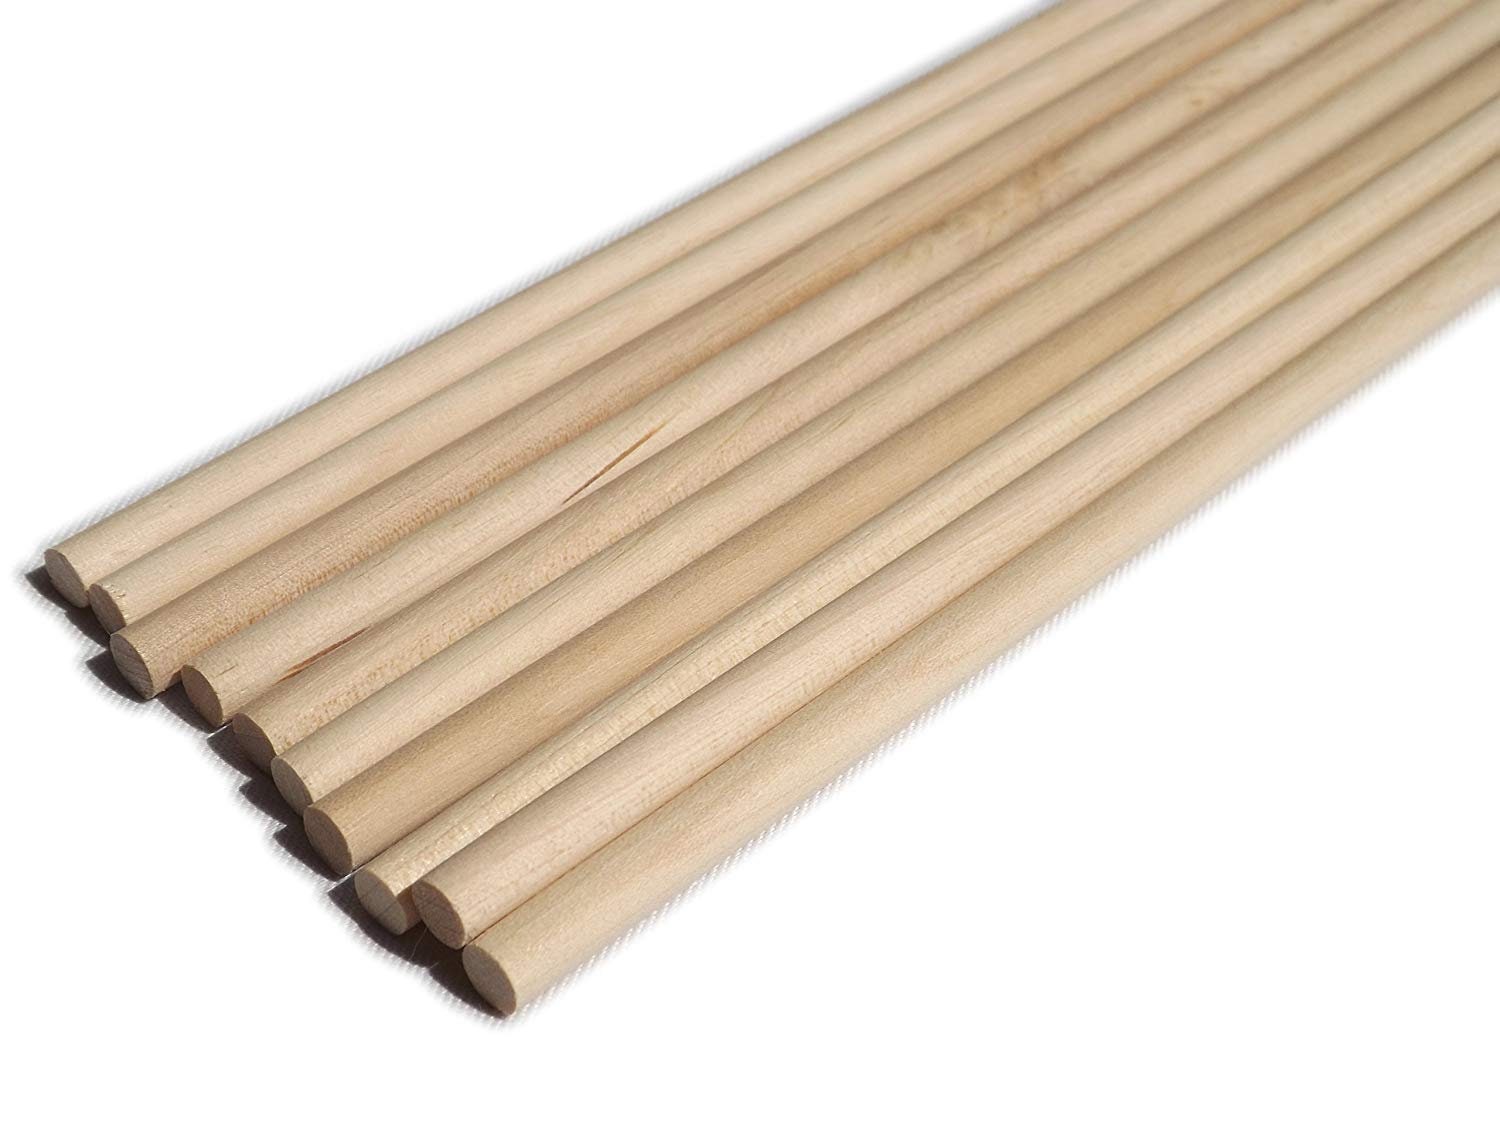 QTY 5 1 X 48 Long Wood Dowels Made of Poplar, Cake Insert, Jewelry Making,  Mustache Holder Prop, Flag Pole, Curtain Rod FREE US Shipping 